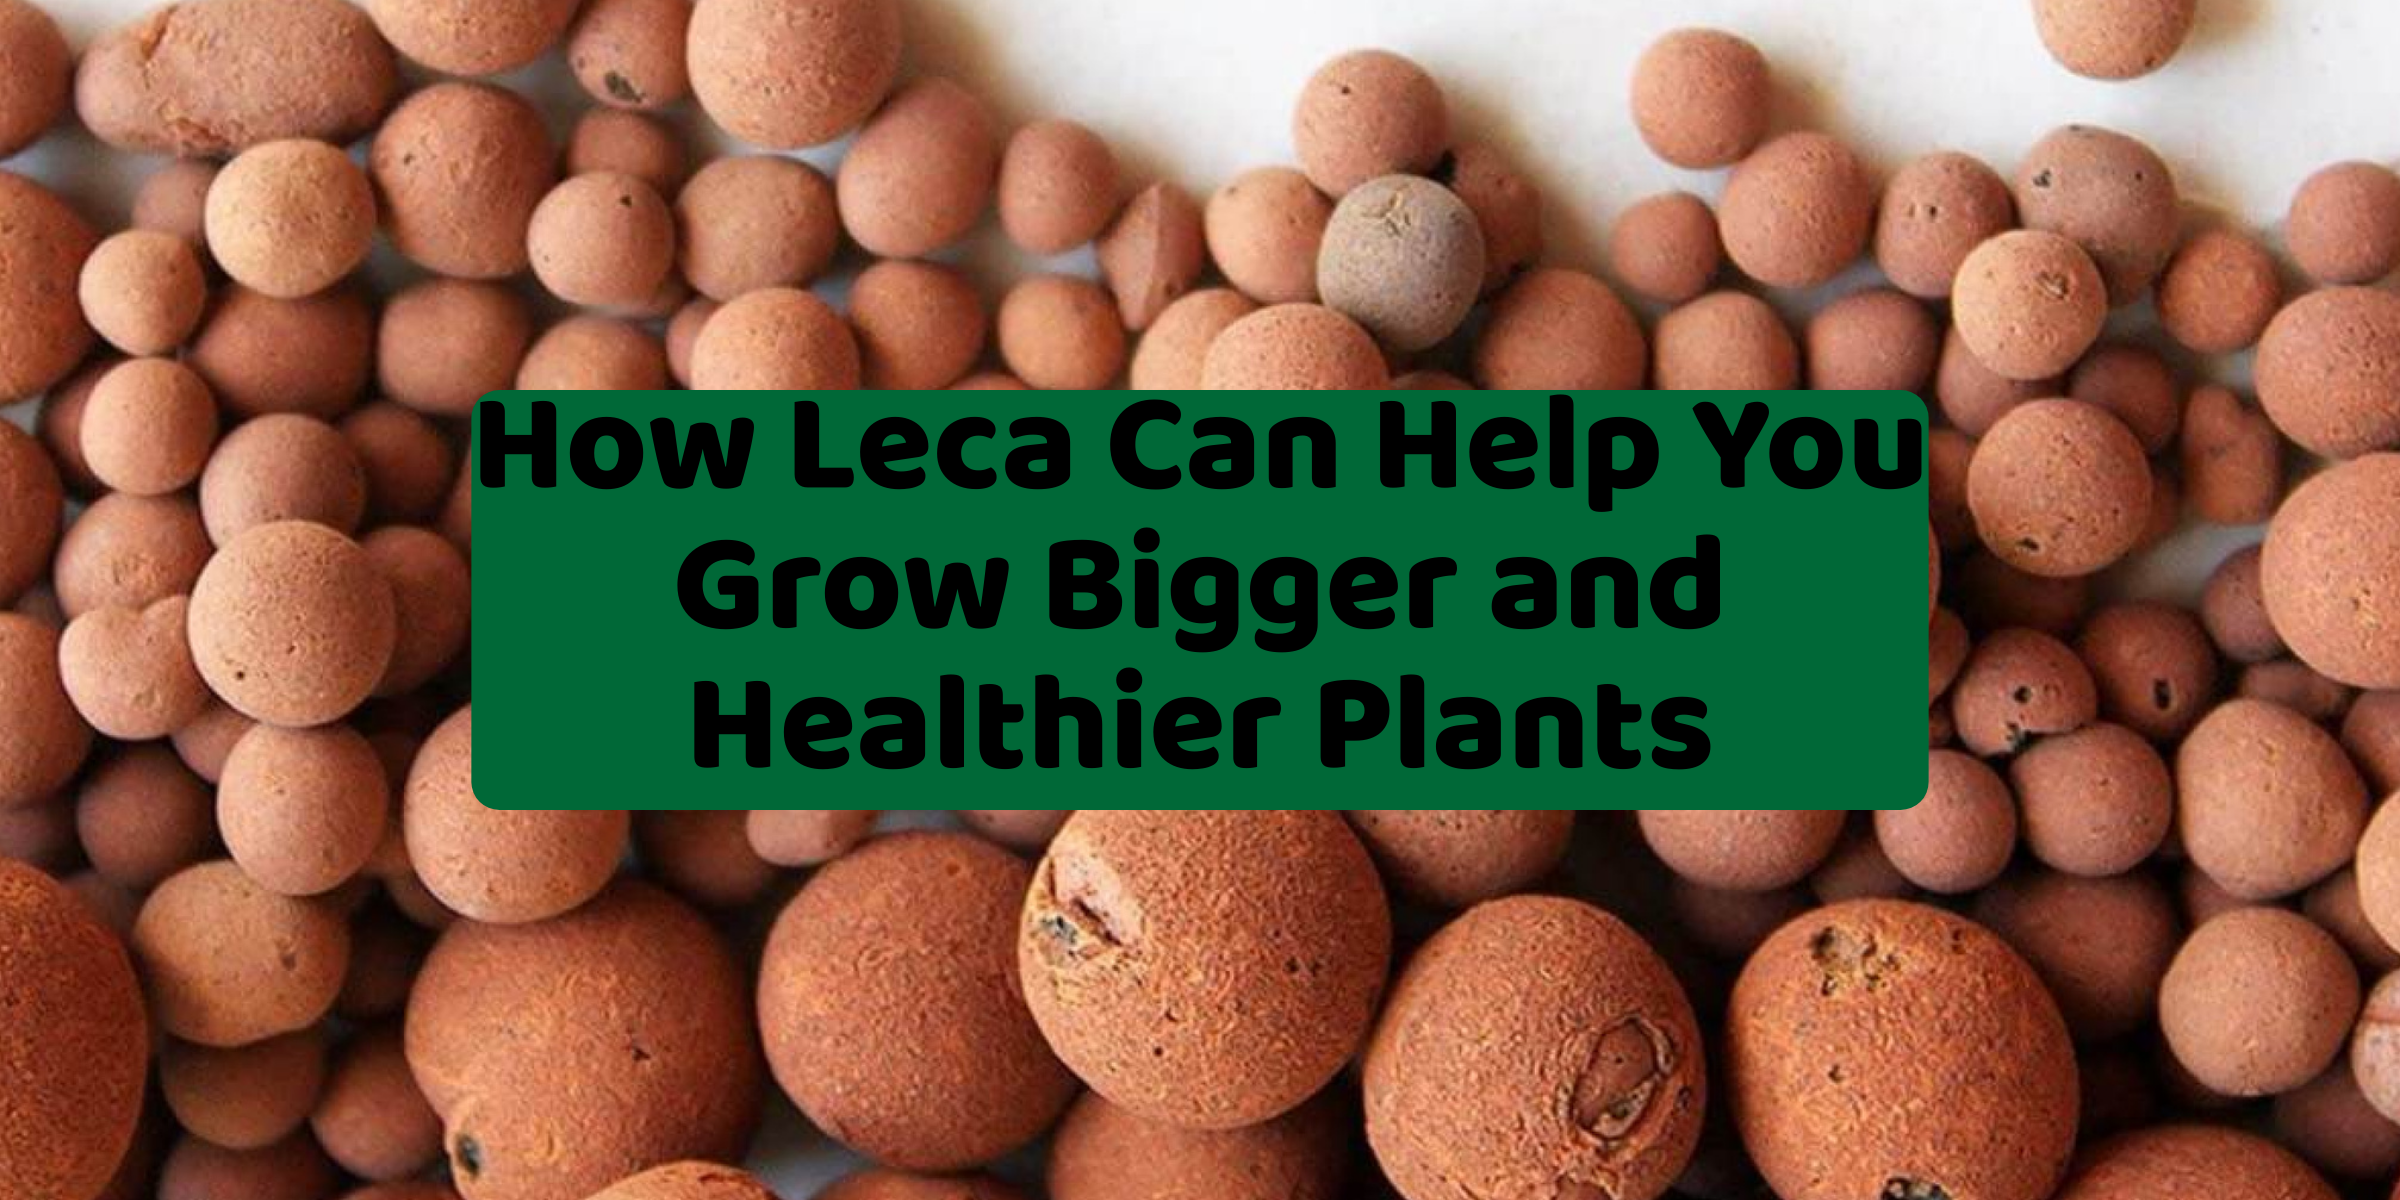 How Leca Can Help You Grow Bigger and Healthier Plants